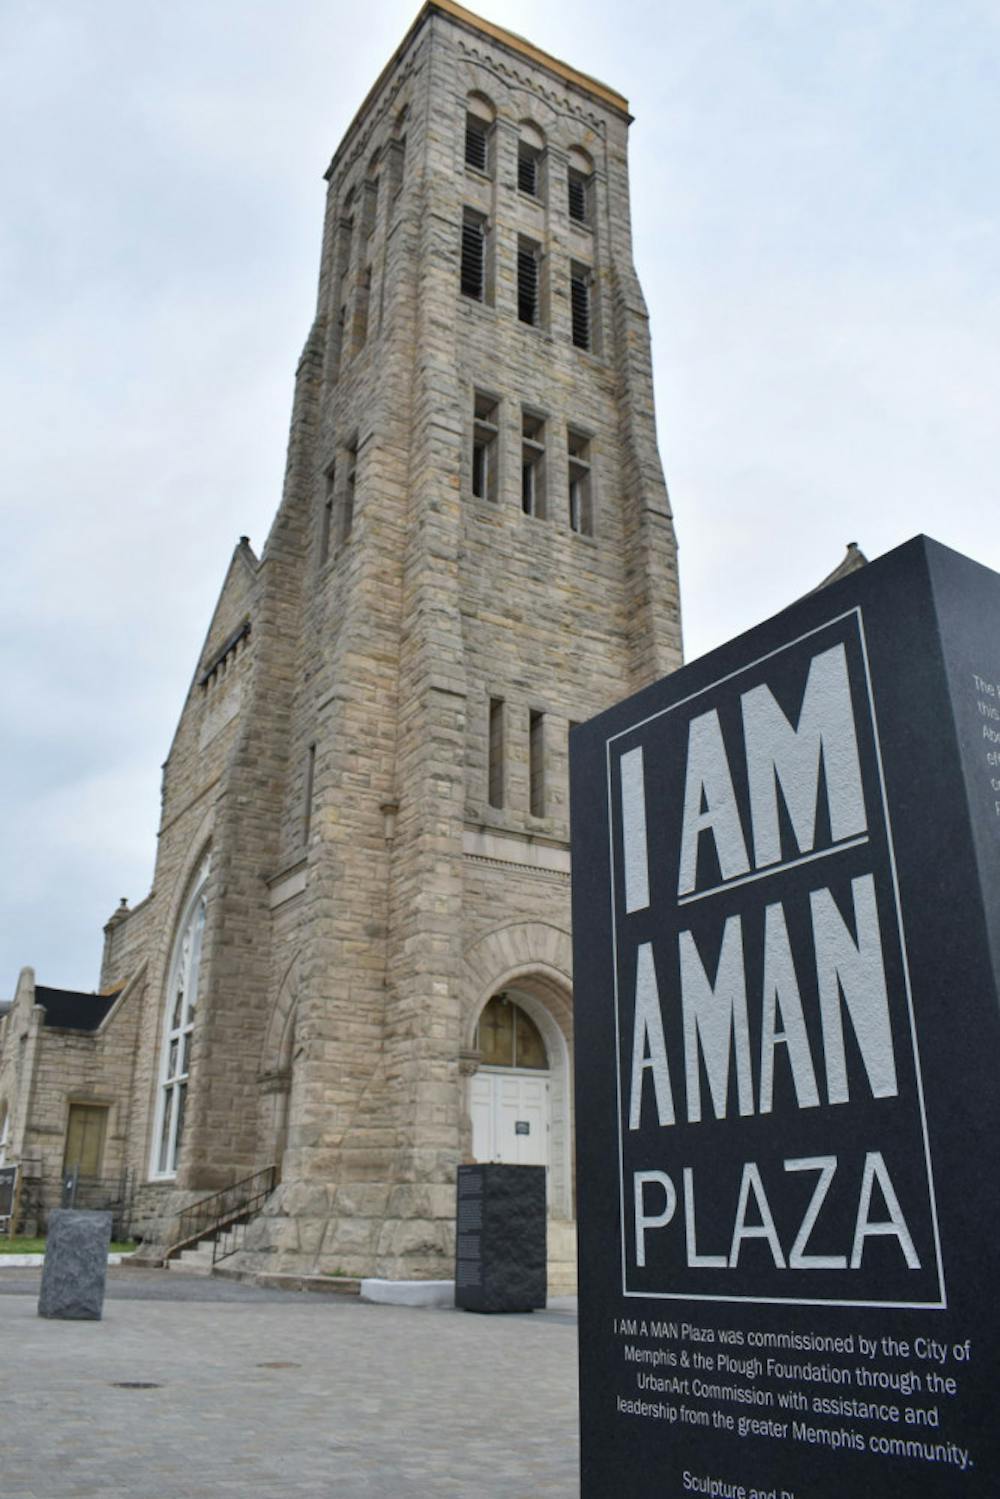 <p>The long-anticipated 'I AM A MAN' Plaza is said to open in time for the MLK50 Commemoration. The plaza (located next to Clayborn Temple) will honor Dr. Martin Luther King's influence on the Civil Rights Movement as well as the 1968 Sanitation Strike.</p>